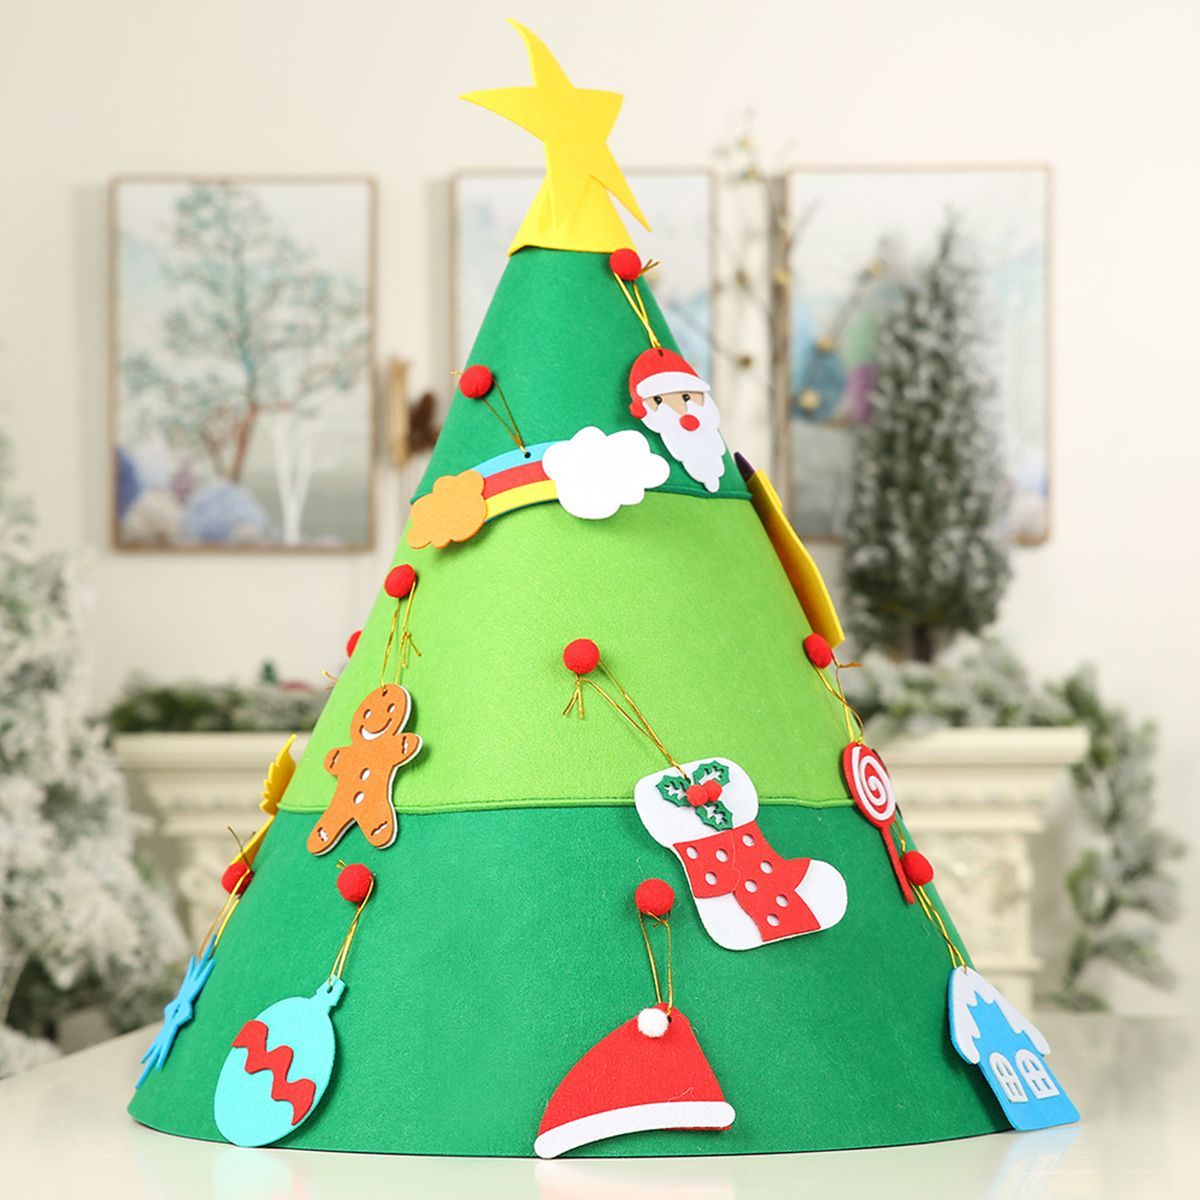 DIY-Christmas-Tree-Ornaments-Home-Decorations-Educational-Toys-Gifts-For-Kids-1605687